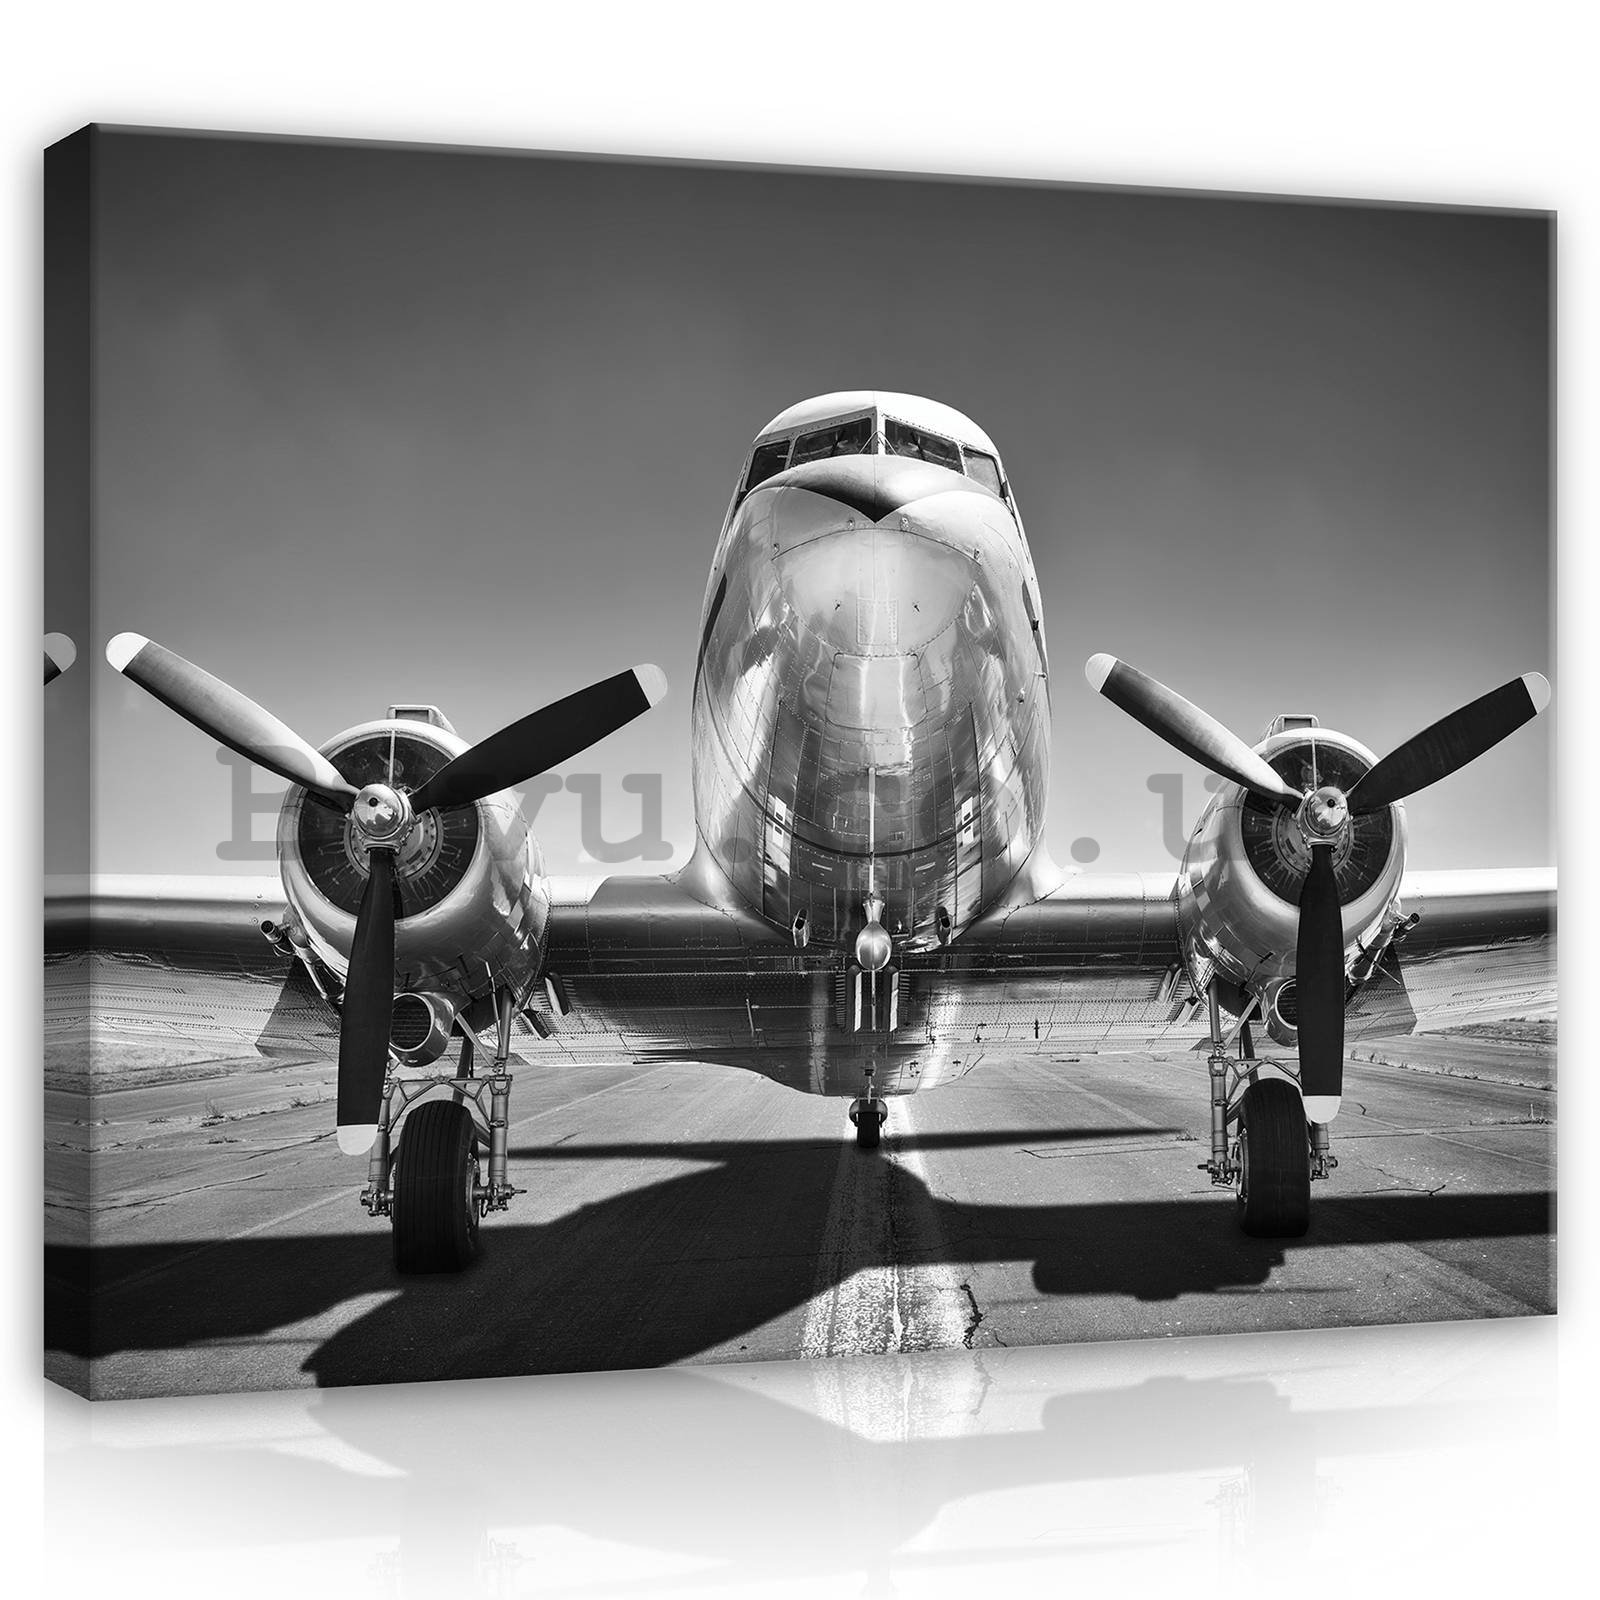 Painting on canvas: Aircraft Black & White (1) - 80x60 cm